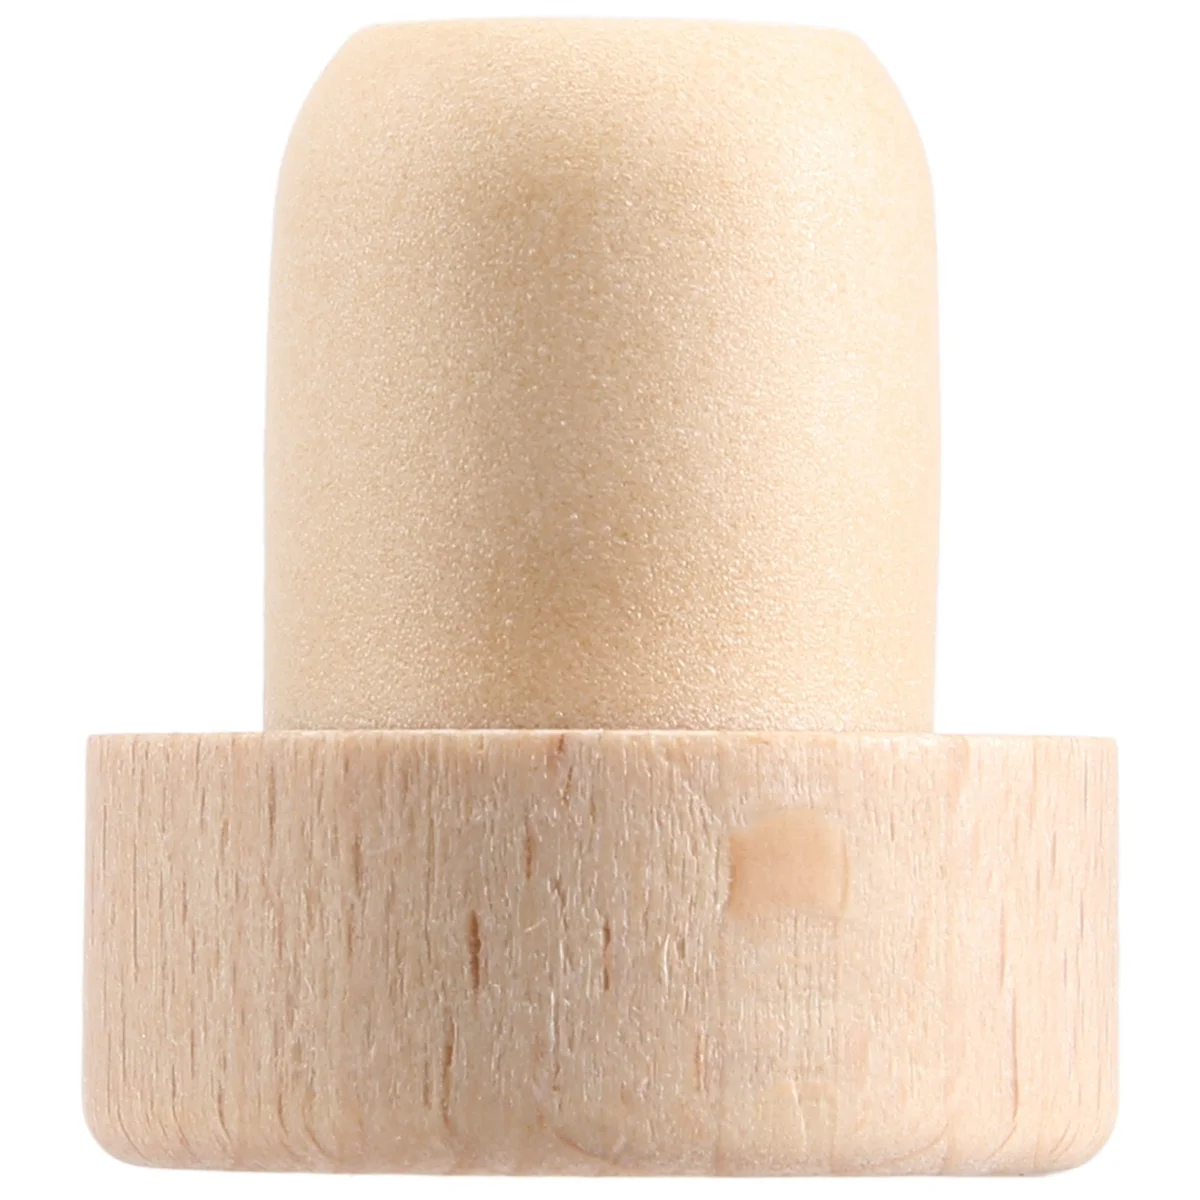 

Wine Bottle Corks T Shaped Cork Plugs for Wine Cork Wine Stopper Reusable Wine Corks Wooden and Rubber Wine Stoppers